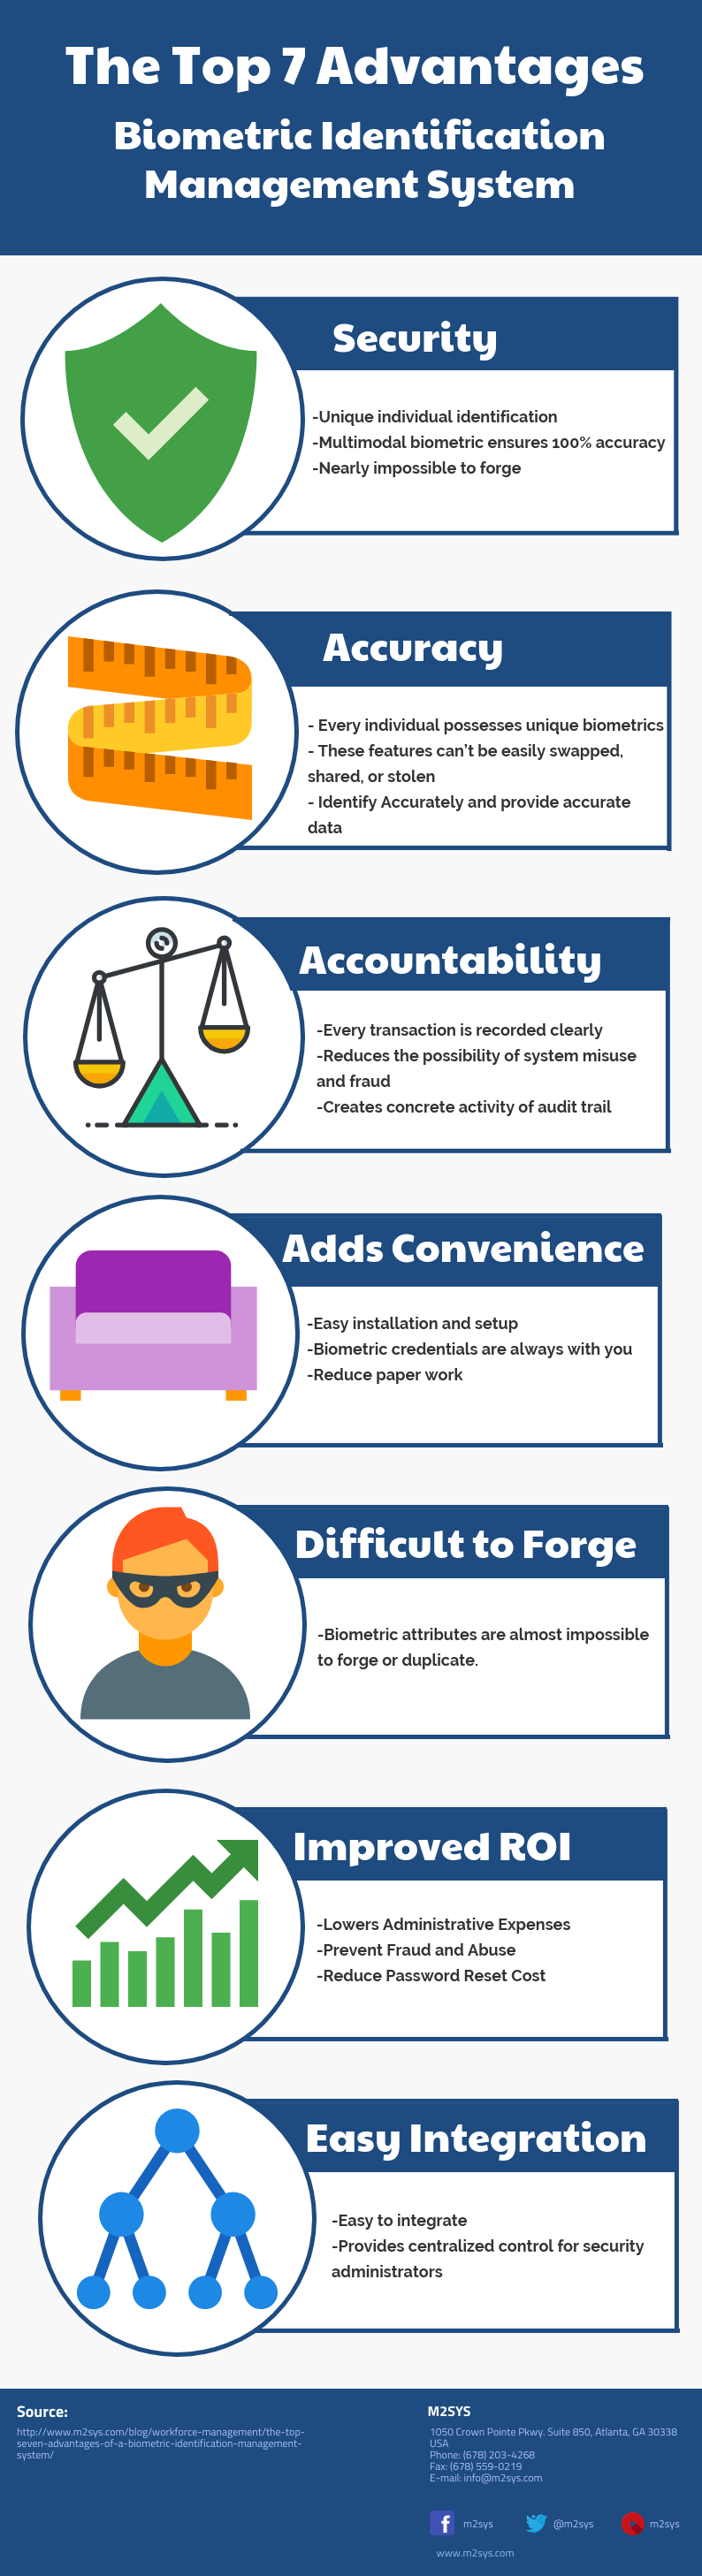 Infographics: 7 Advantages of a Biometric Identification Management System (2)